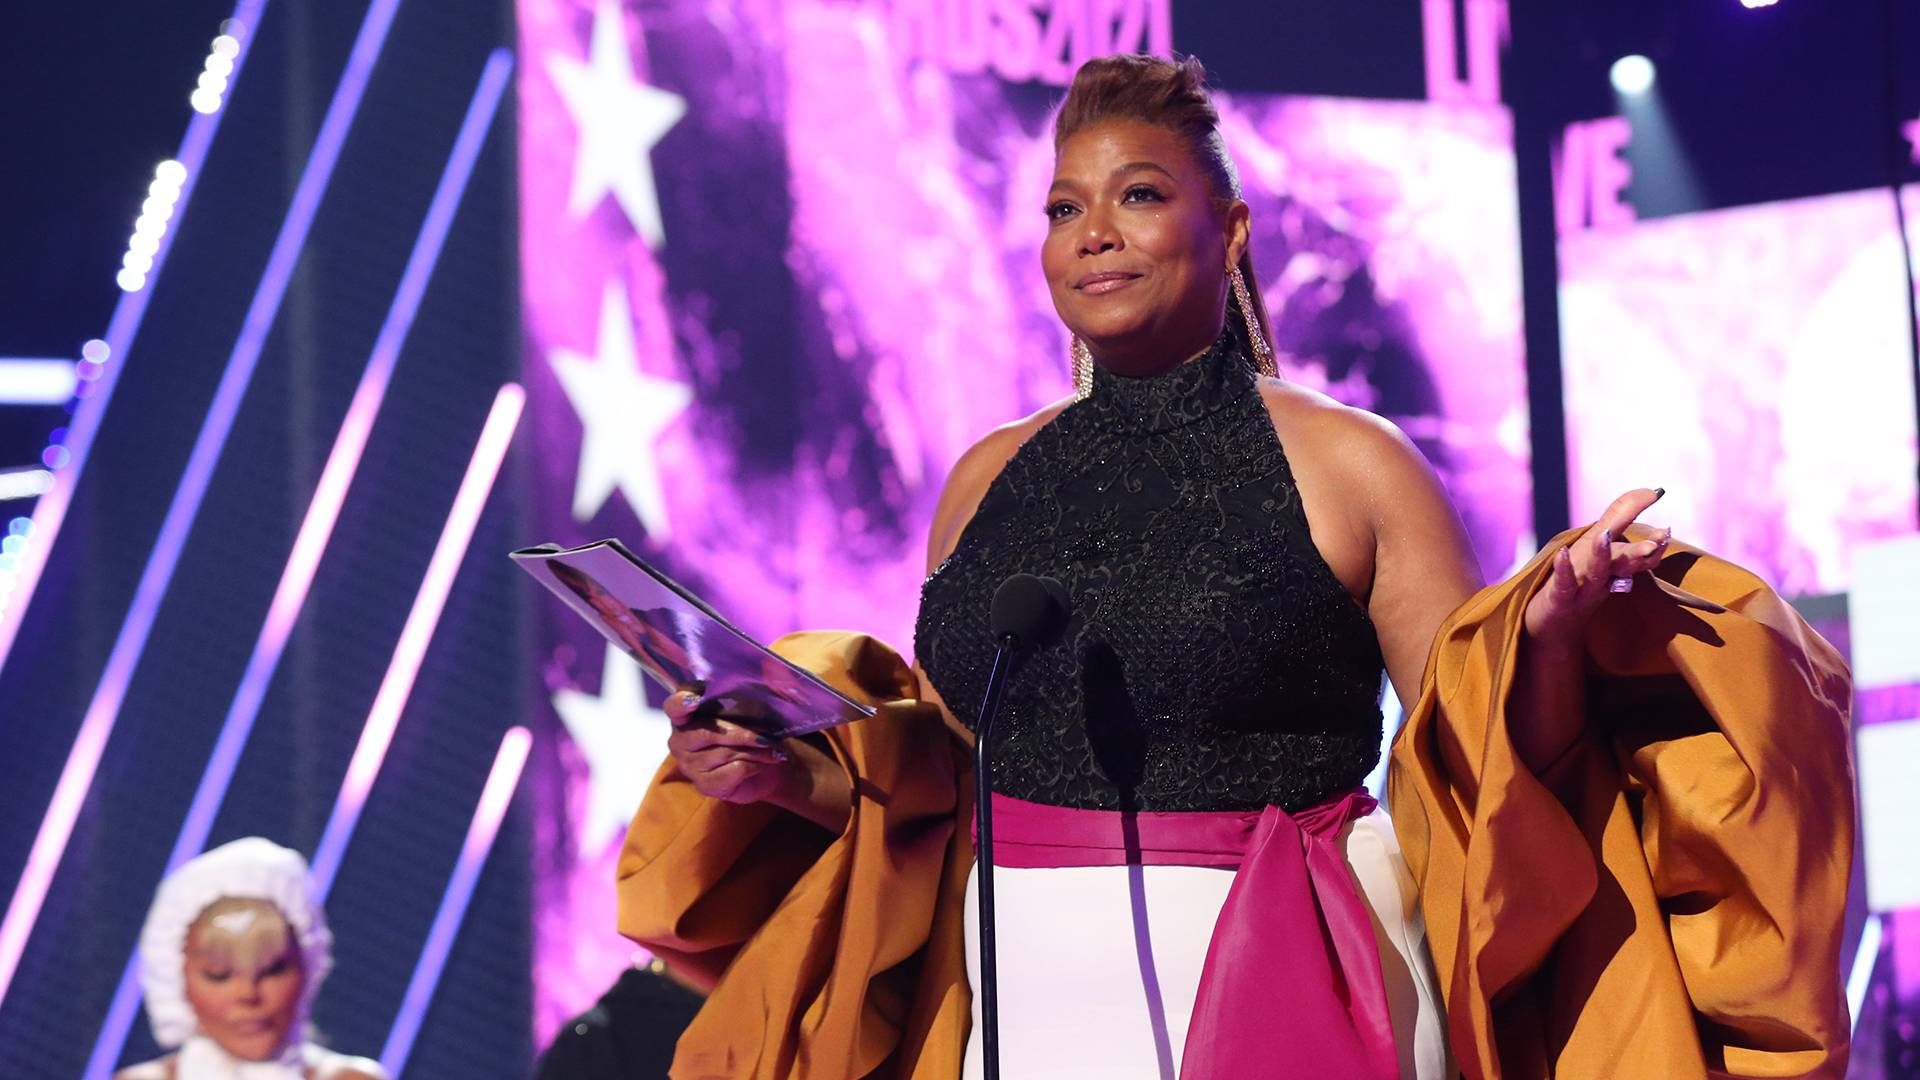 Queen Latifah accepts the Lifetime Achievement Award for her contributions to the entertainment industry and her trailblazing work as a Black businesswoman.